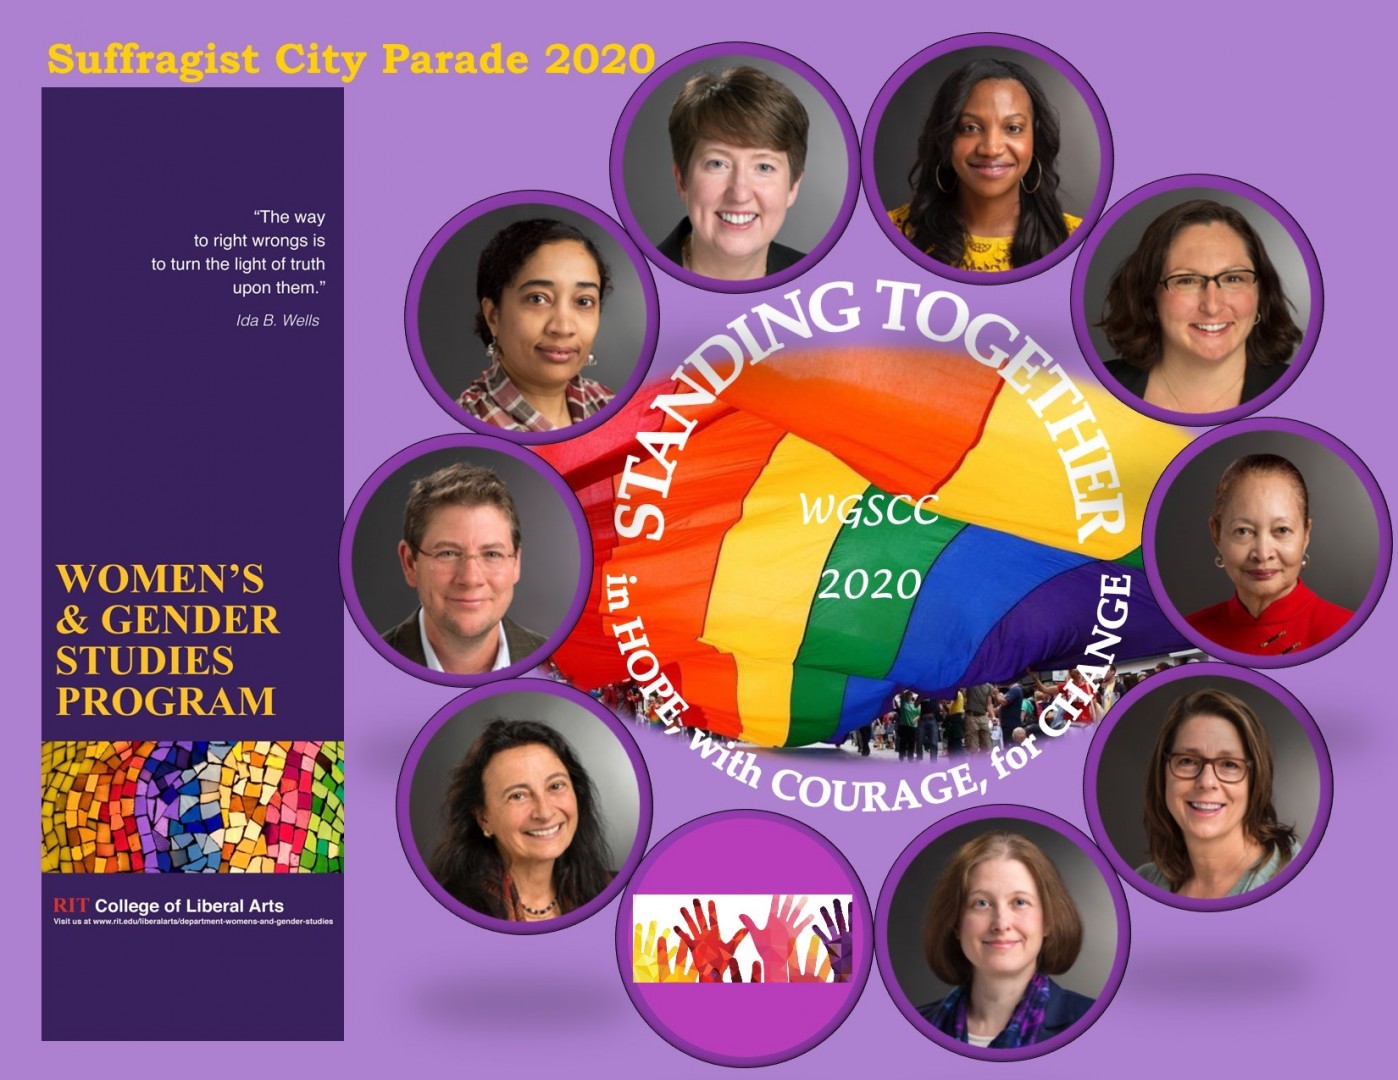 The CLA WGS Program will attend the virtual Suffragist City Parade 2020 on September 20, starting at 6:00 PM.M.